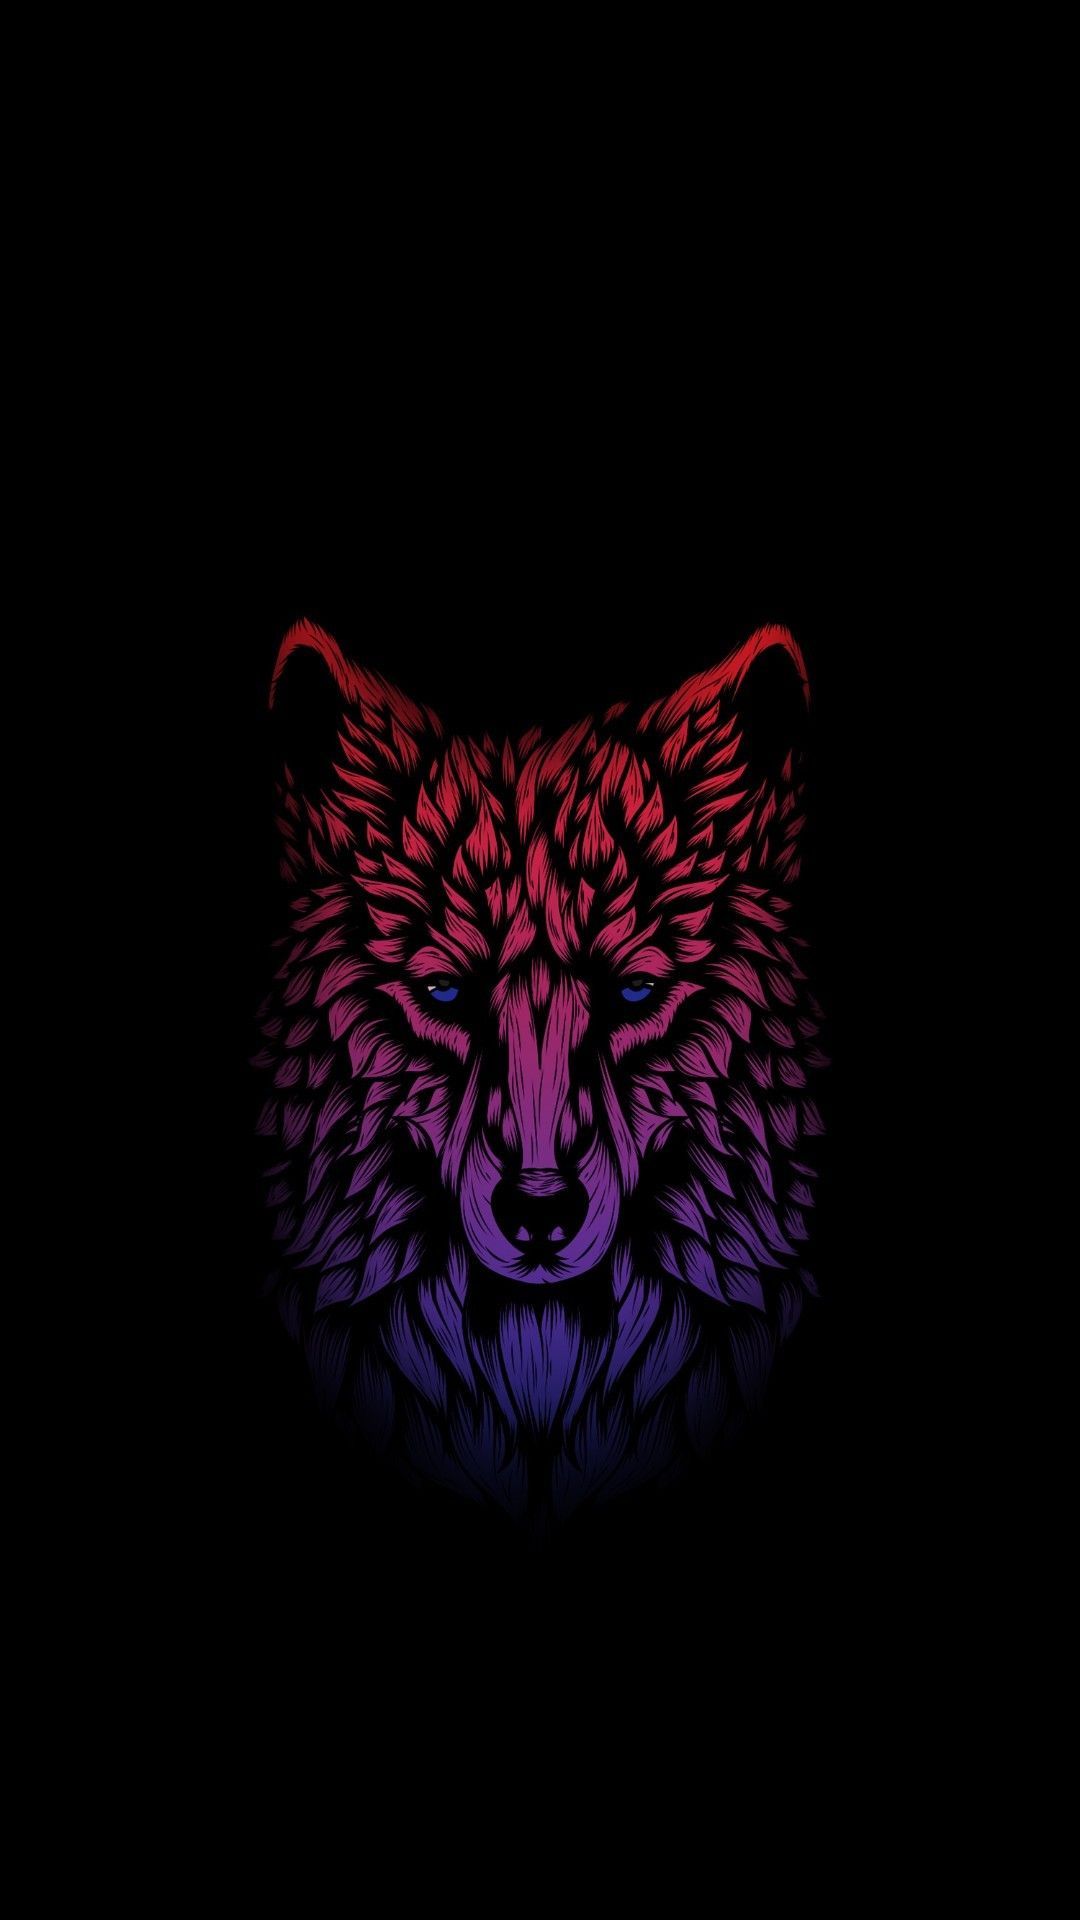 Wallpaper Android, Wolves, Shirt Print, Manish, Mobile